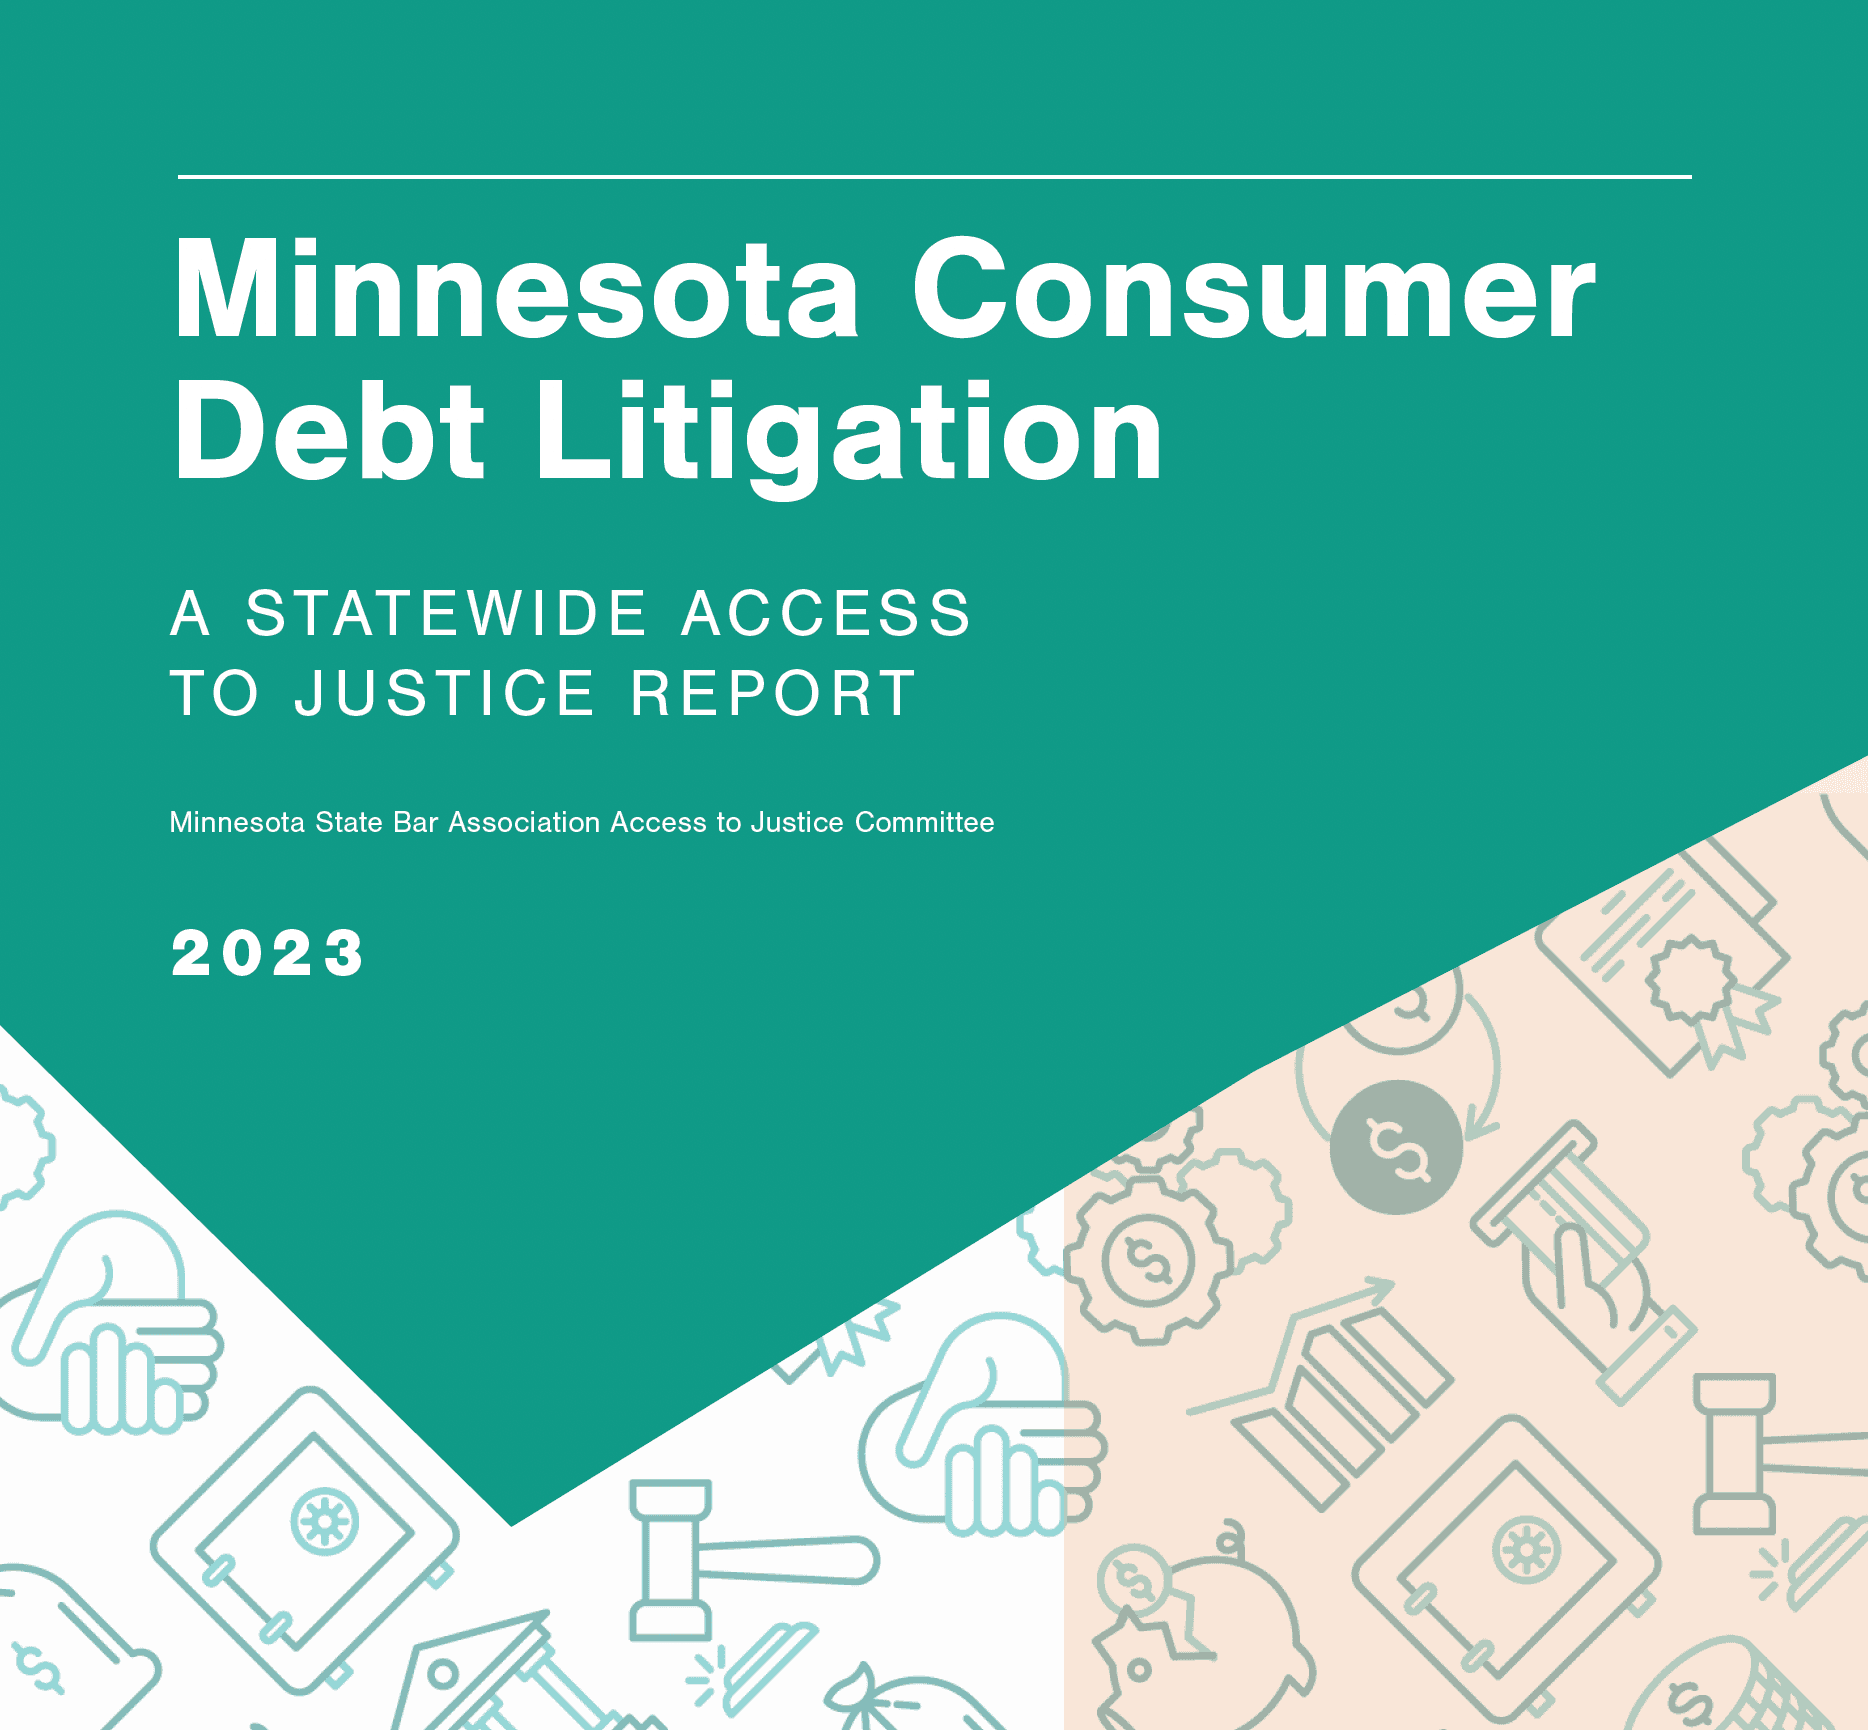 Minnesota Consumer Debt Litigation: A Statewide Access to Justice Report